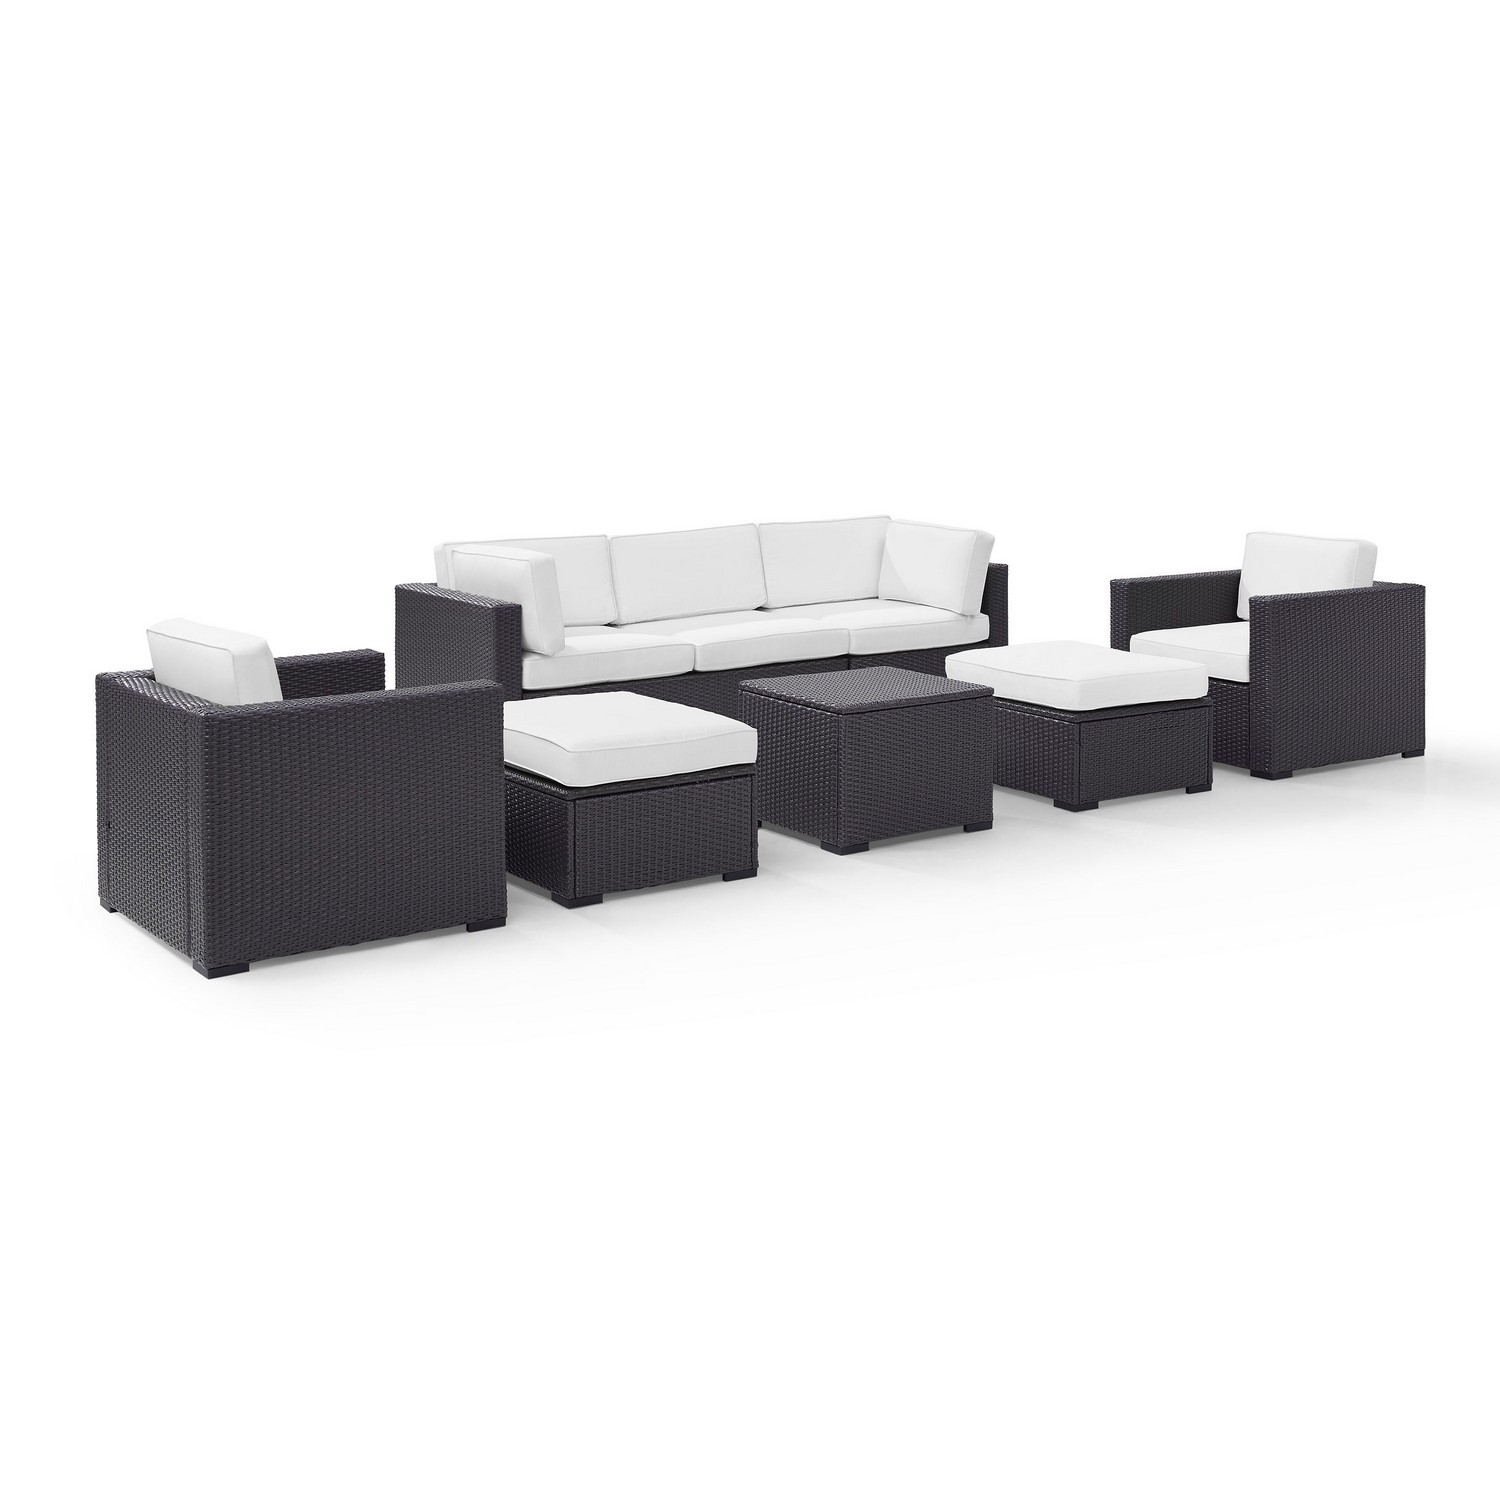 Crosley Biscayne 7-PC Outdoor Wicker Sectional Set - Loveseat, 2 Arm Chairs, Corner Chair, Coffee Table, 2 Ottomans - White/Brown